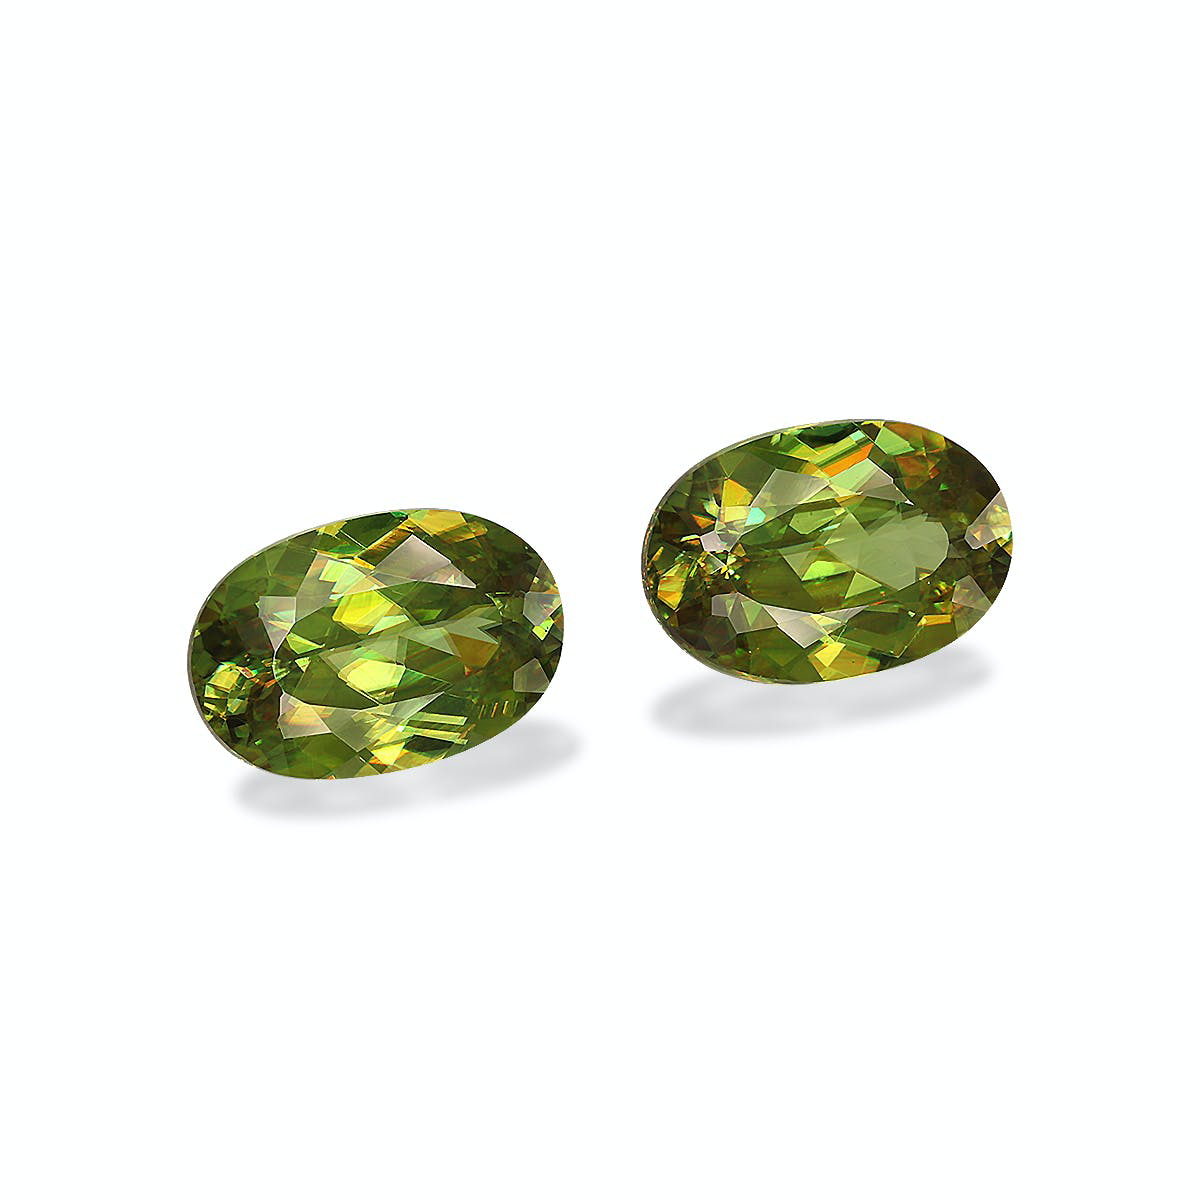 Picture of Green Sphene 14.19ct - Pair (SH1037)